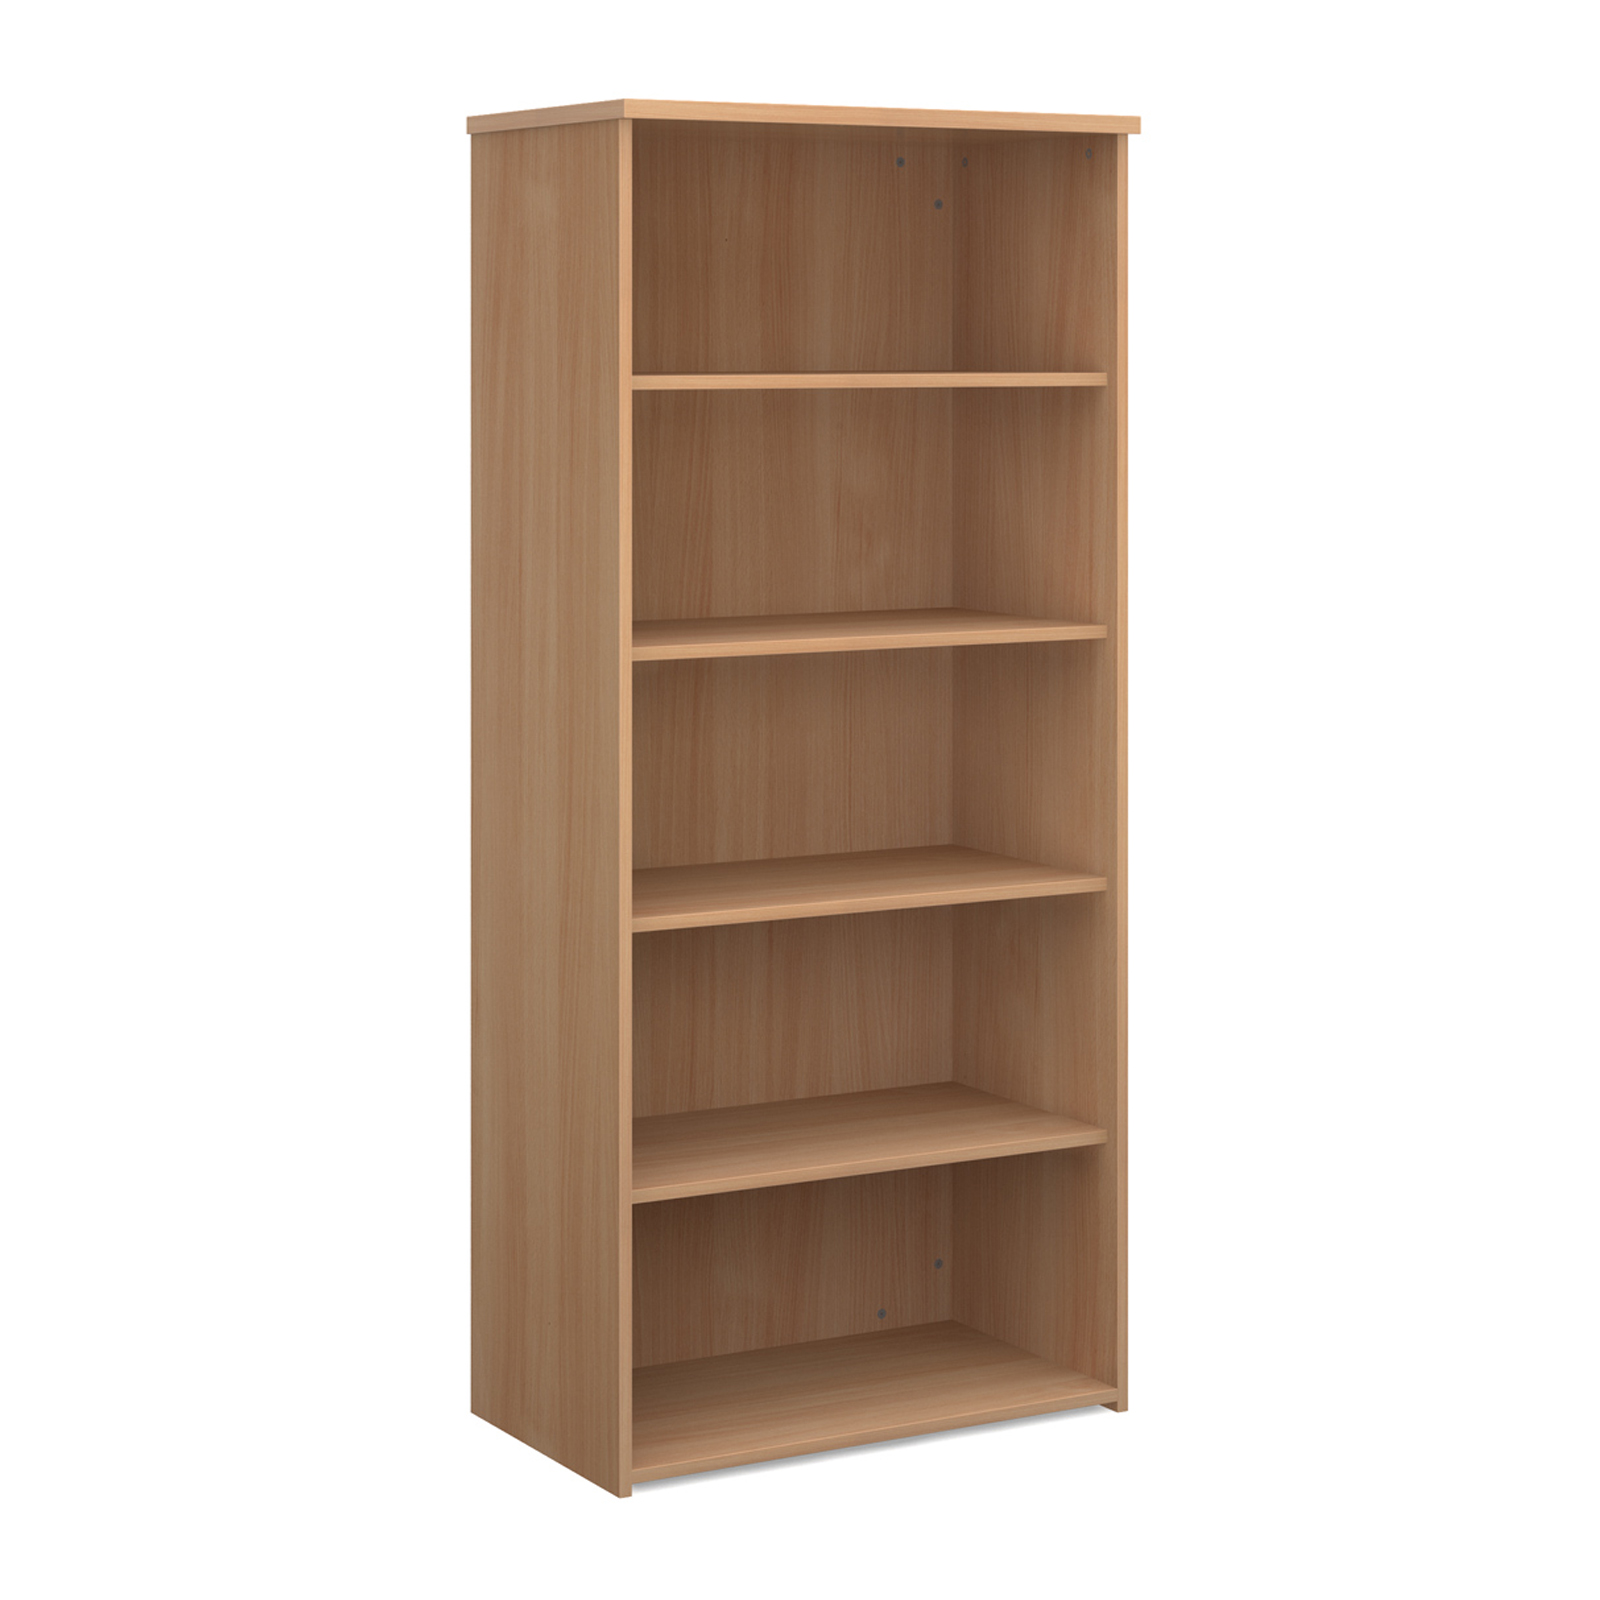 Over 1200mm High Universal bookcase 1790mm high with 4 shelves - beech